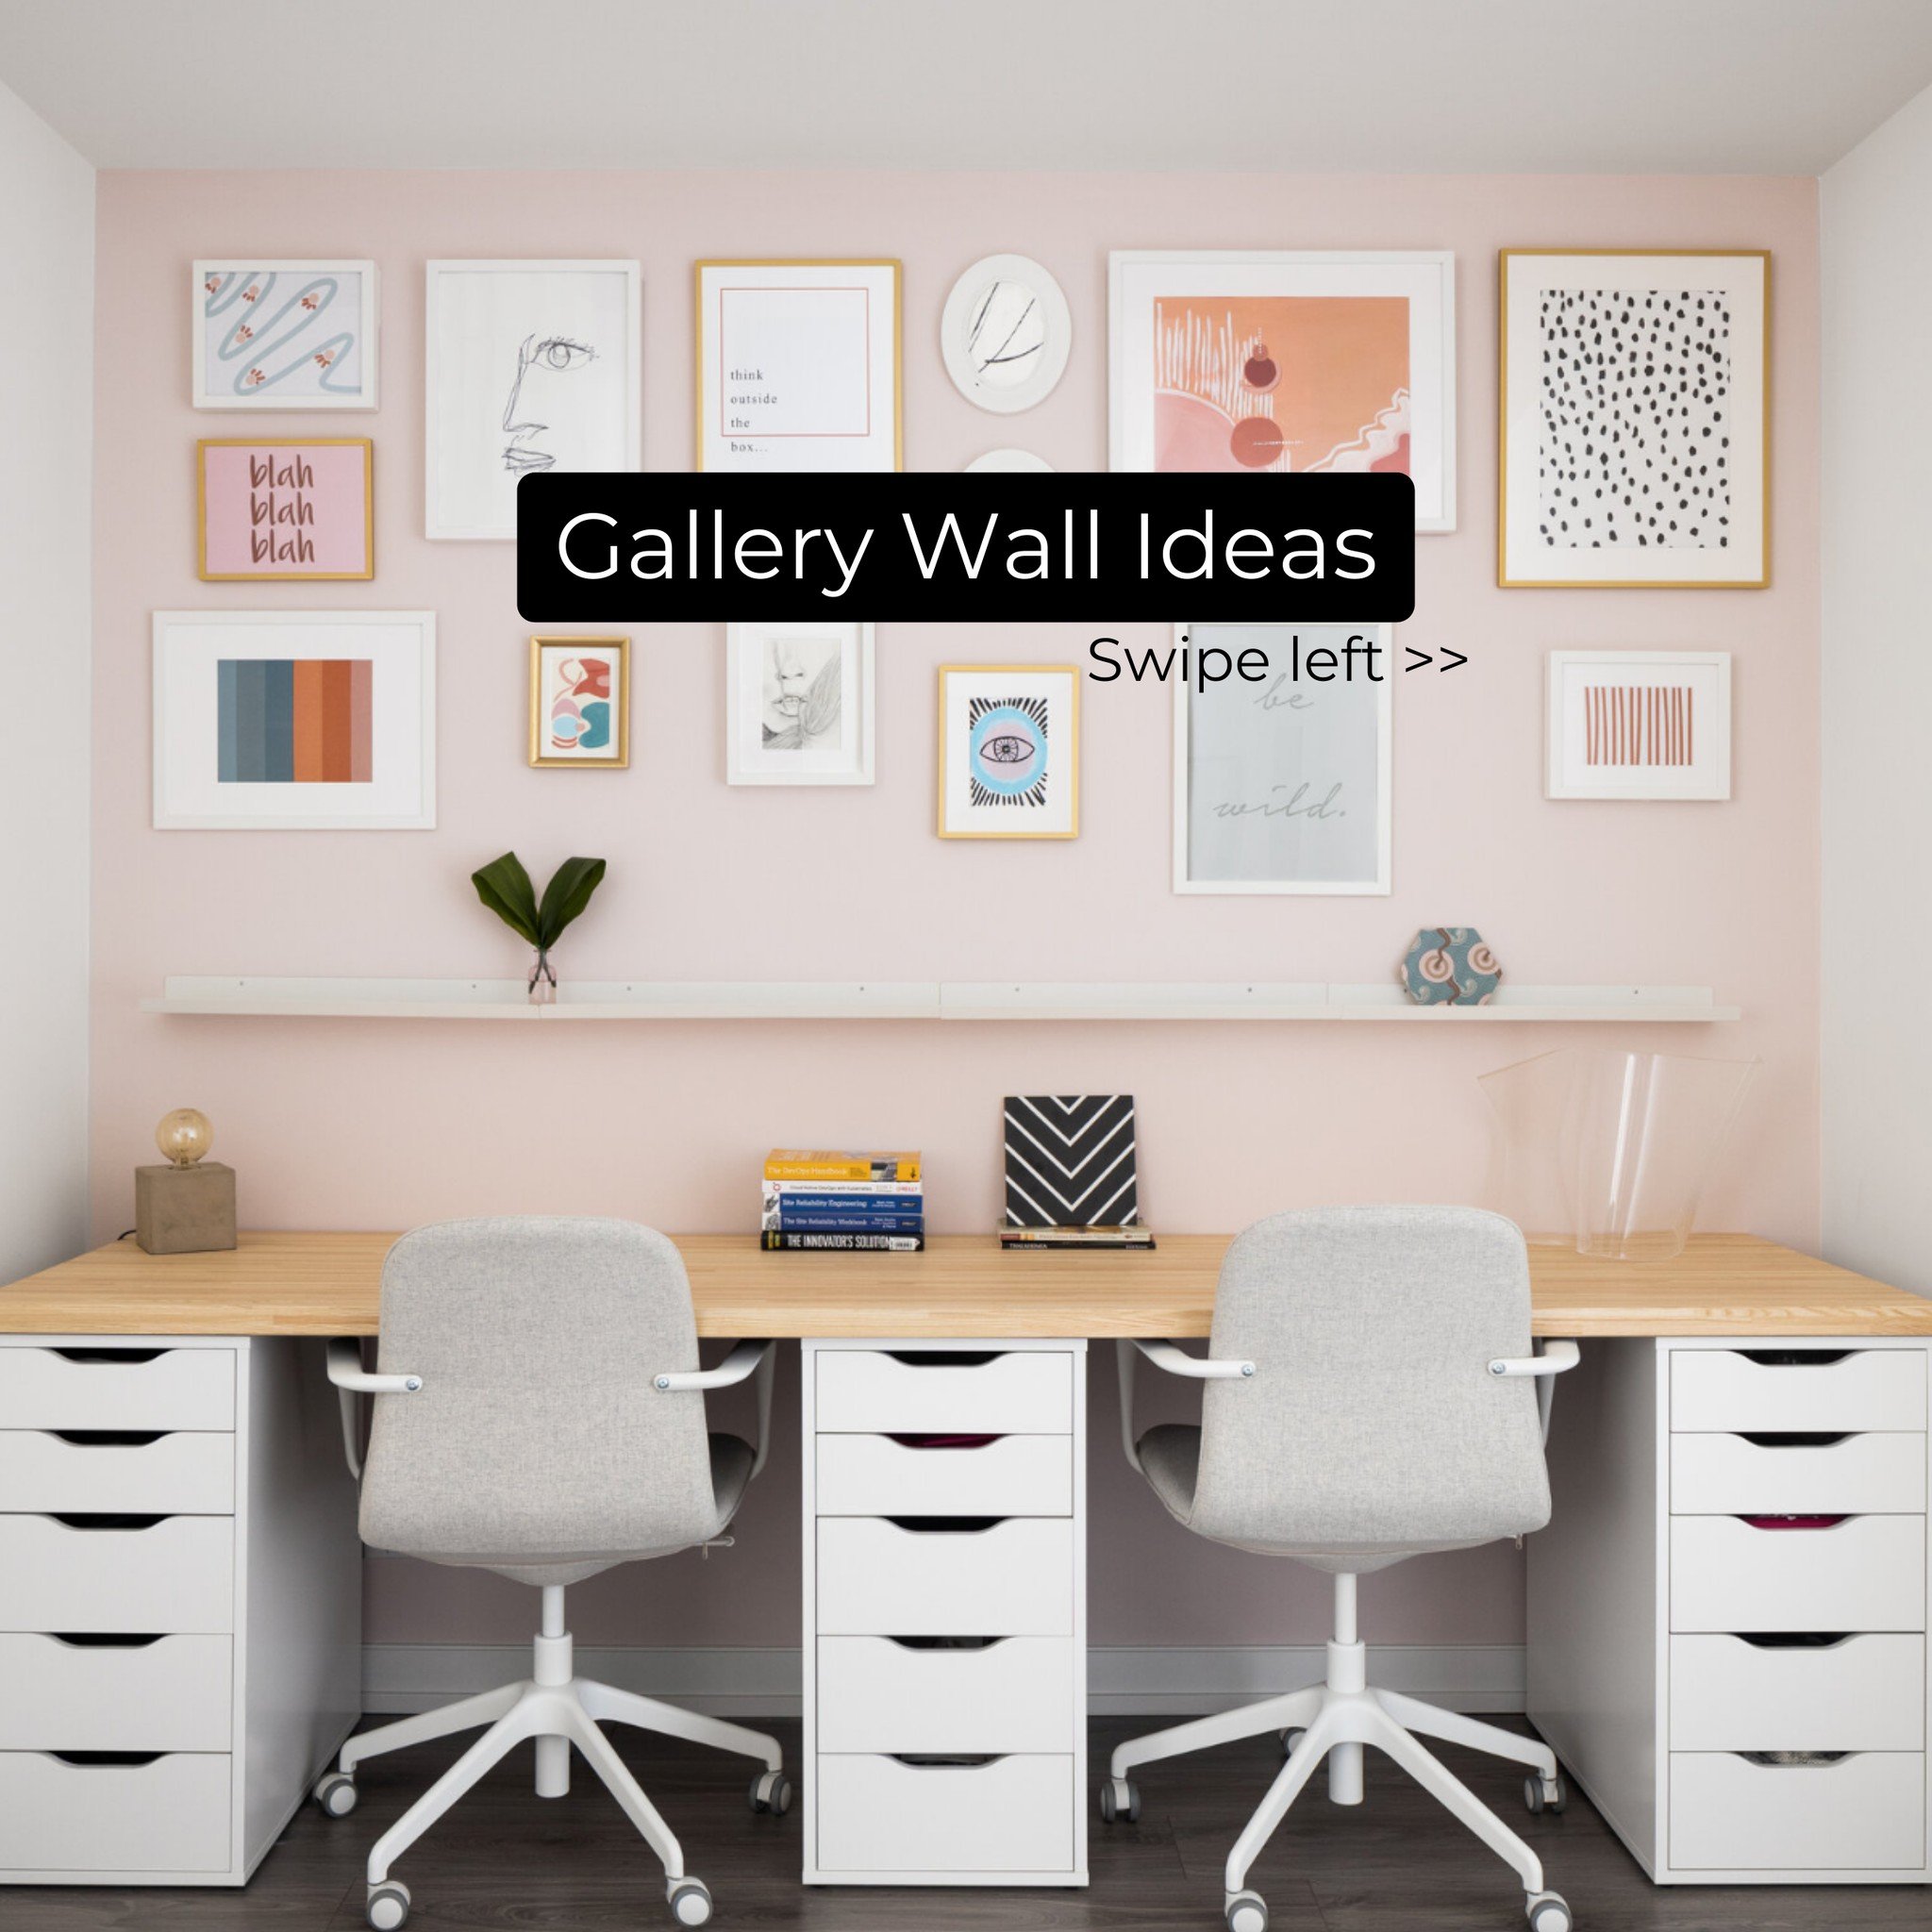 Create a stunning gallery wall by mixing framed prints, photos, memorabilia, and art pieces.

Perfect for any room, gallery walls add personality and visual interest, elevating your decor with endless arrangement possibilities.
.
.
.
#walldecorideas 